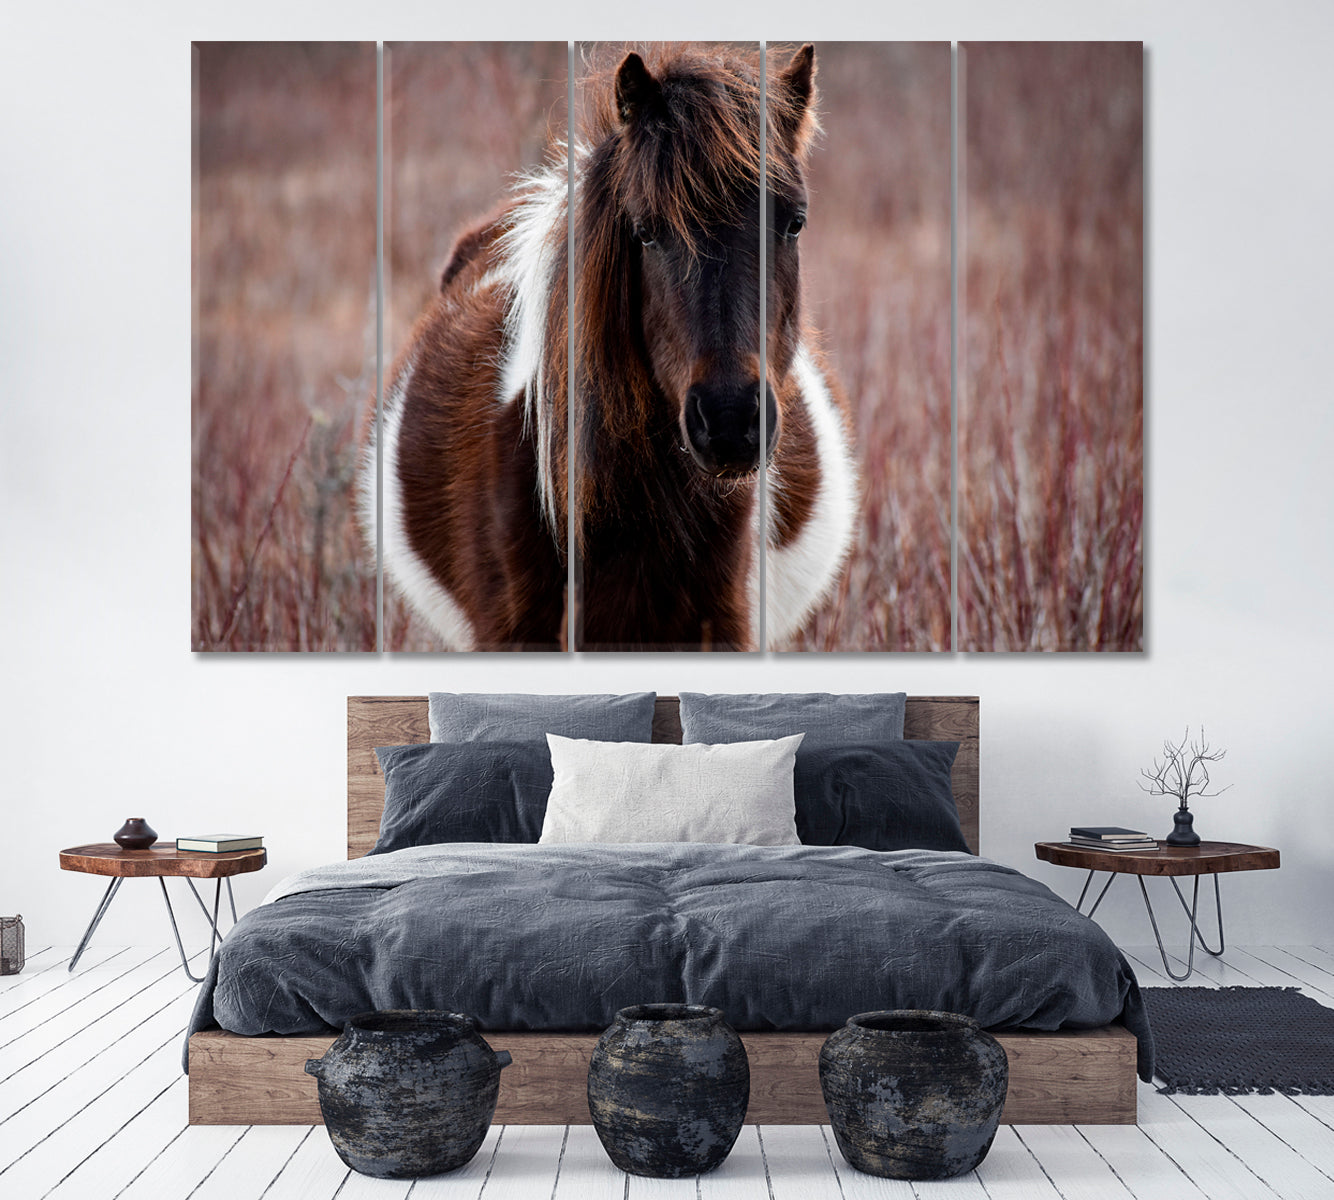 Wild Pony in Grayson Highlands Virginia Canvas Print ArtLexy 5 Panels 36"x24" inches 